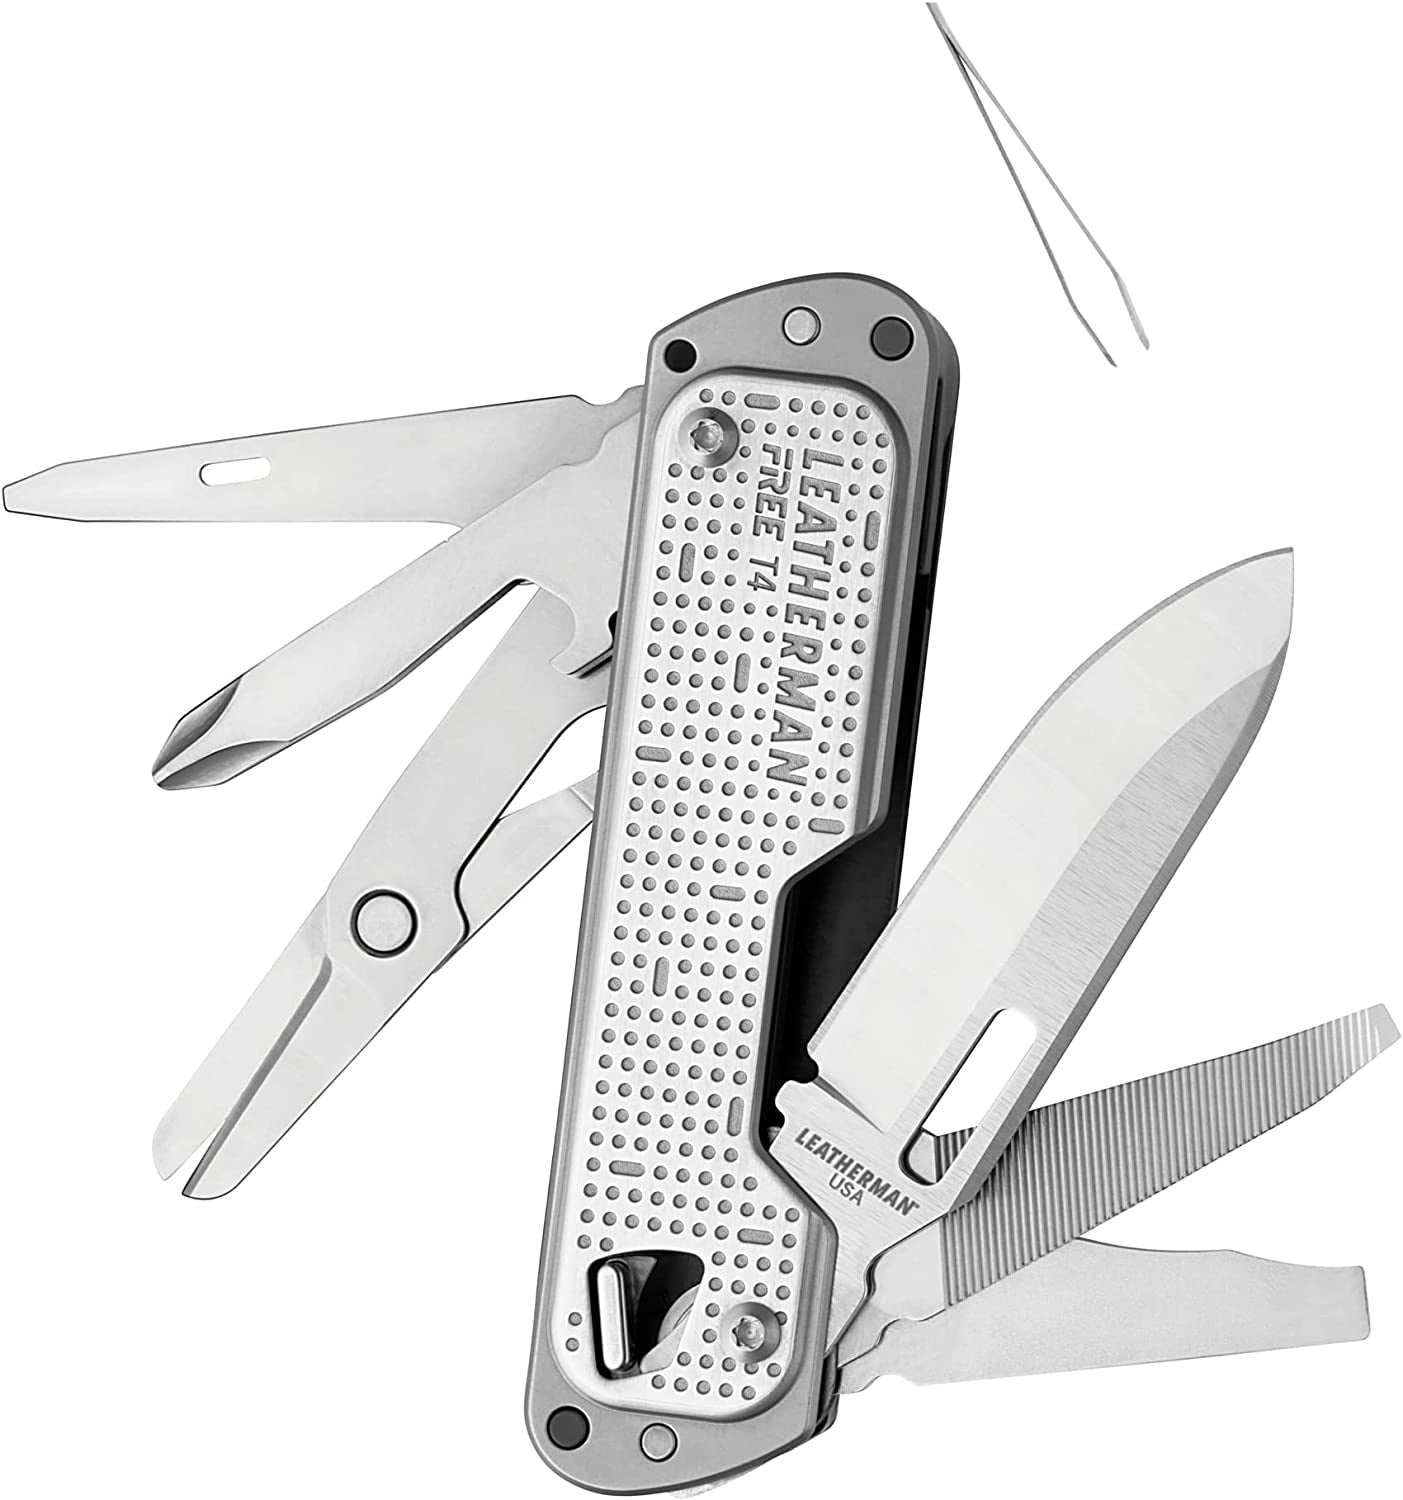 Leatherman, LEATHERMAN - FREE T4 Multitool and EDC Pocket Knife with Magnetic Locking and One Hand Accessible Tools